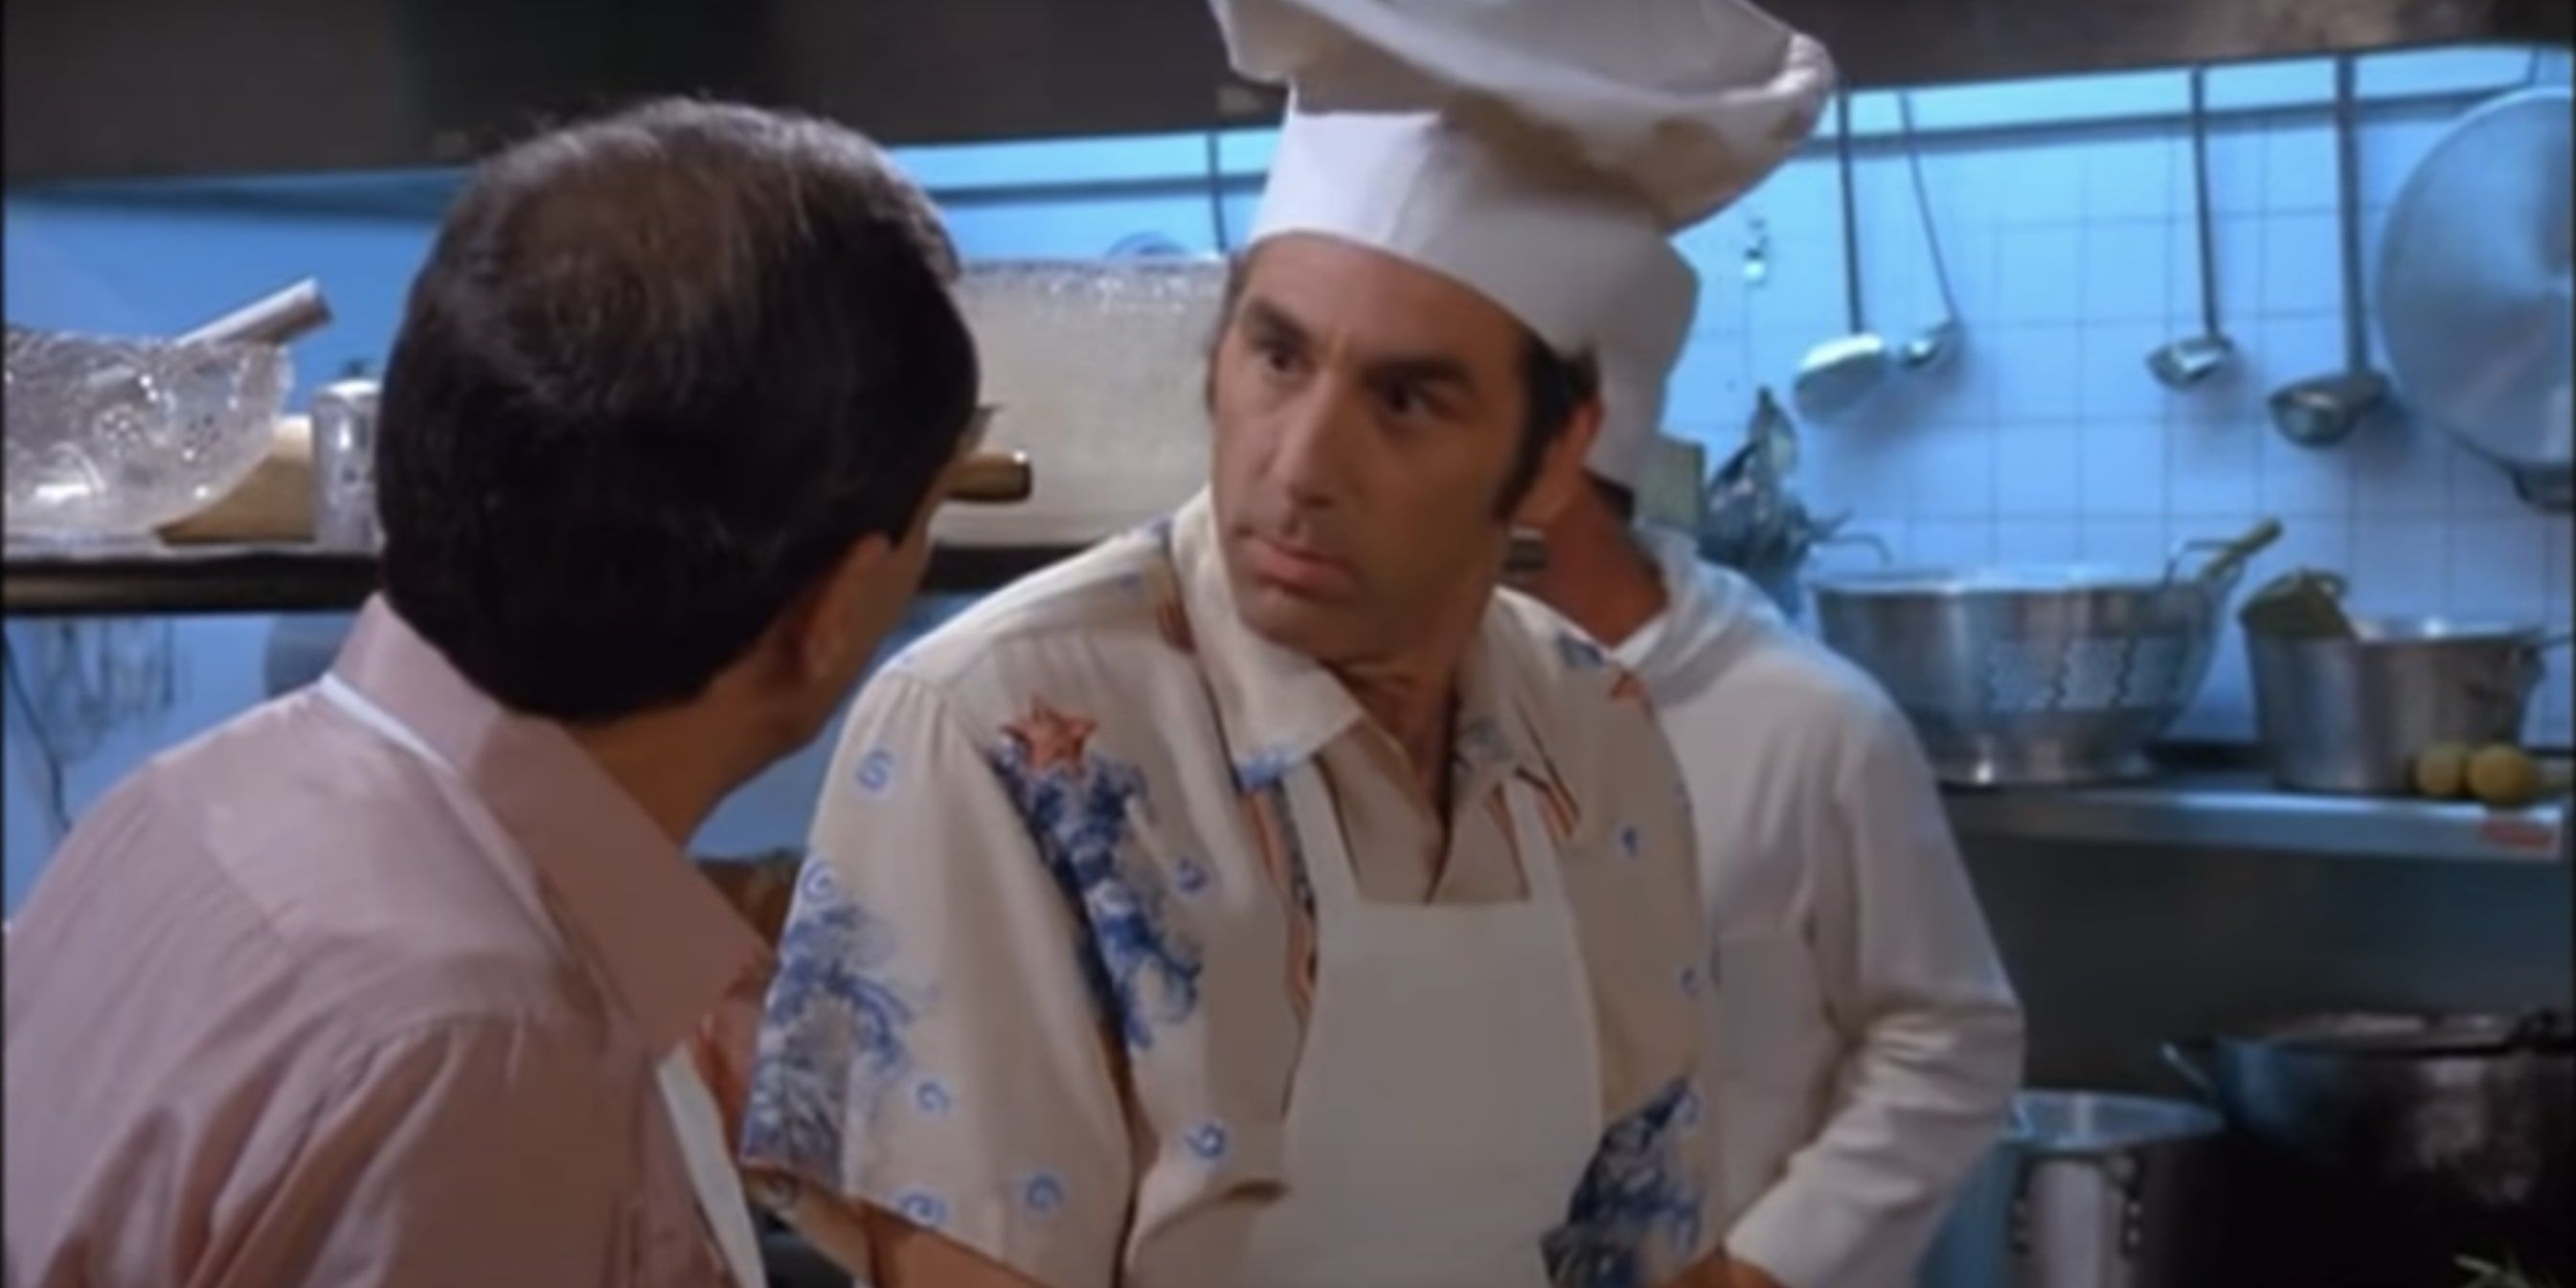 Kramer works in a kitchen and wear a chef’s hat in Seinfeld